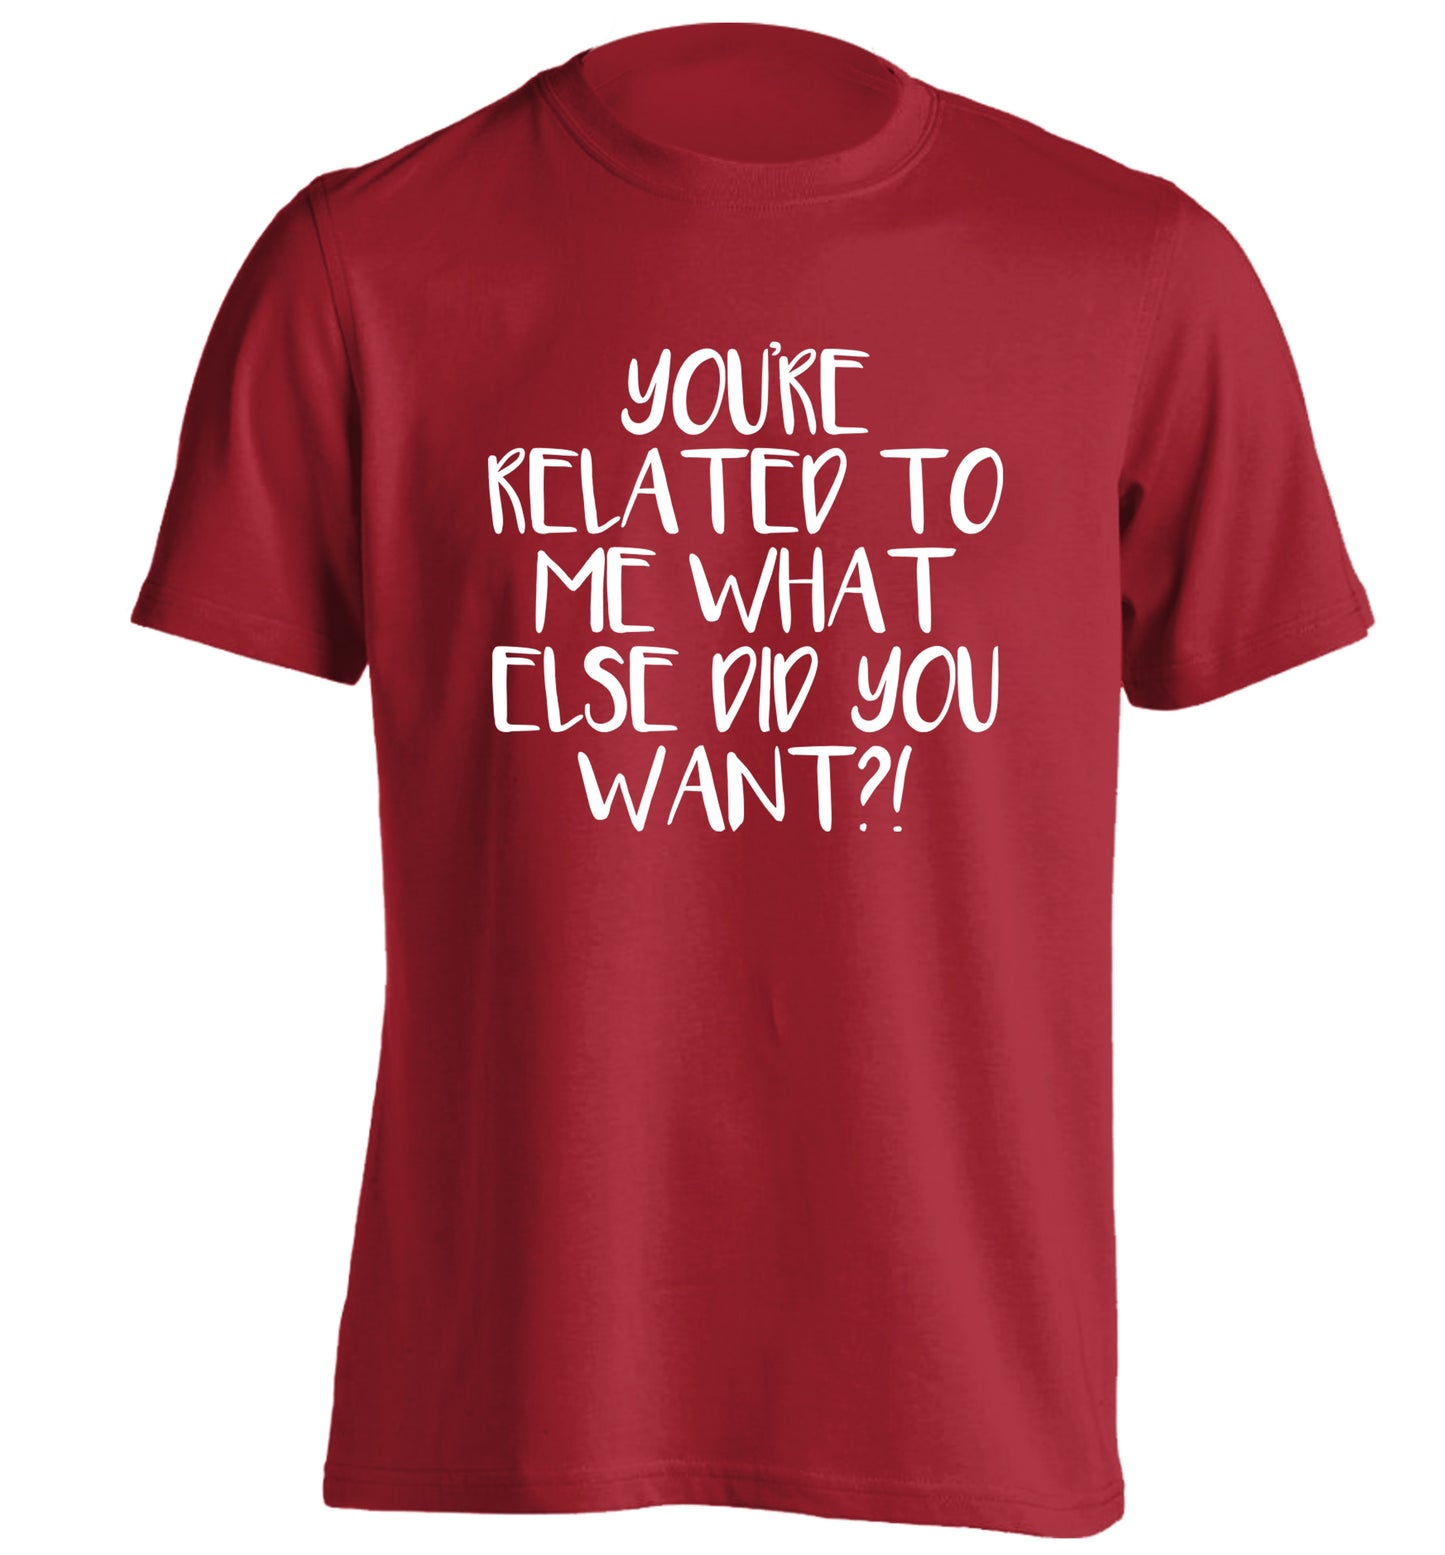 You're related to me what more do you want? adults unisex red Tshirt 2XL